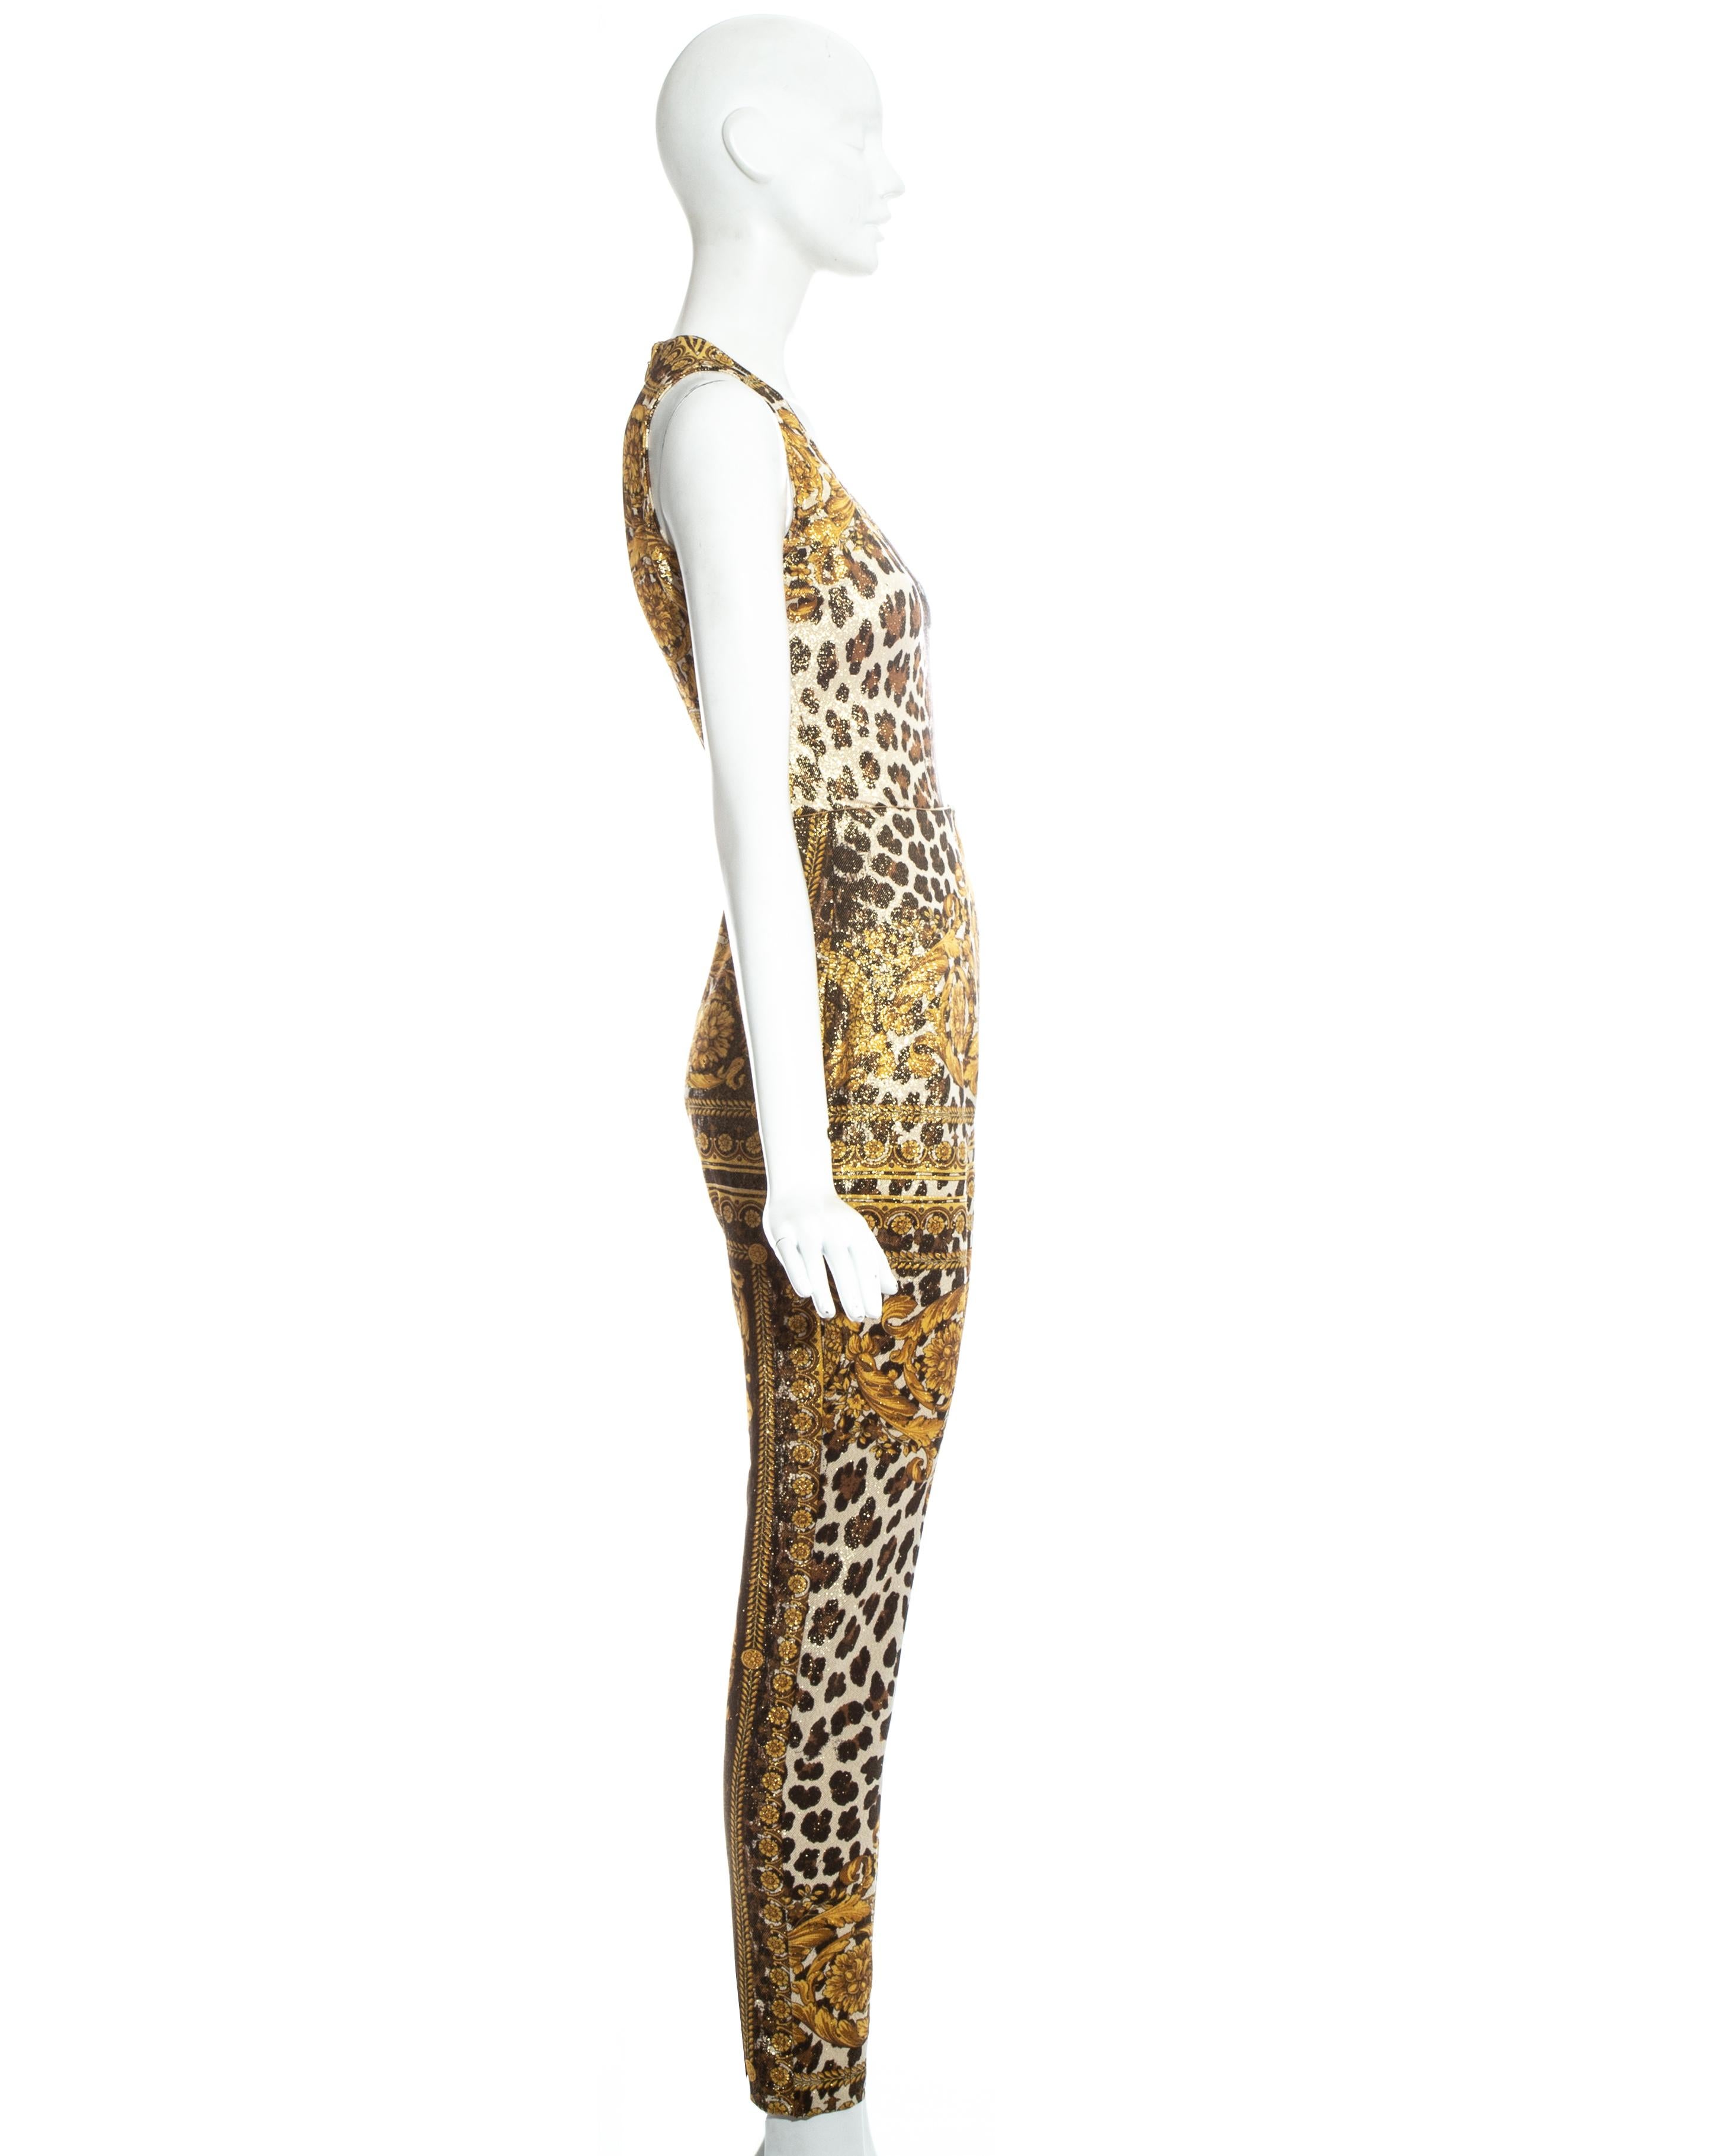 Gianni Versace gold leopard printed bodysuit and pants, ss 1992 For Sale 2